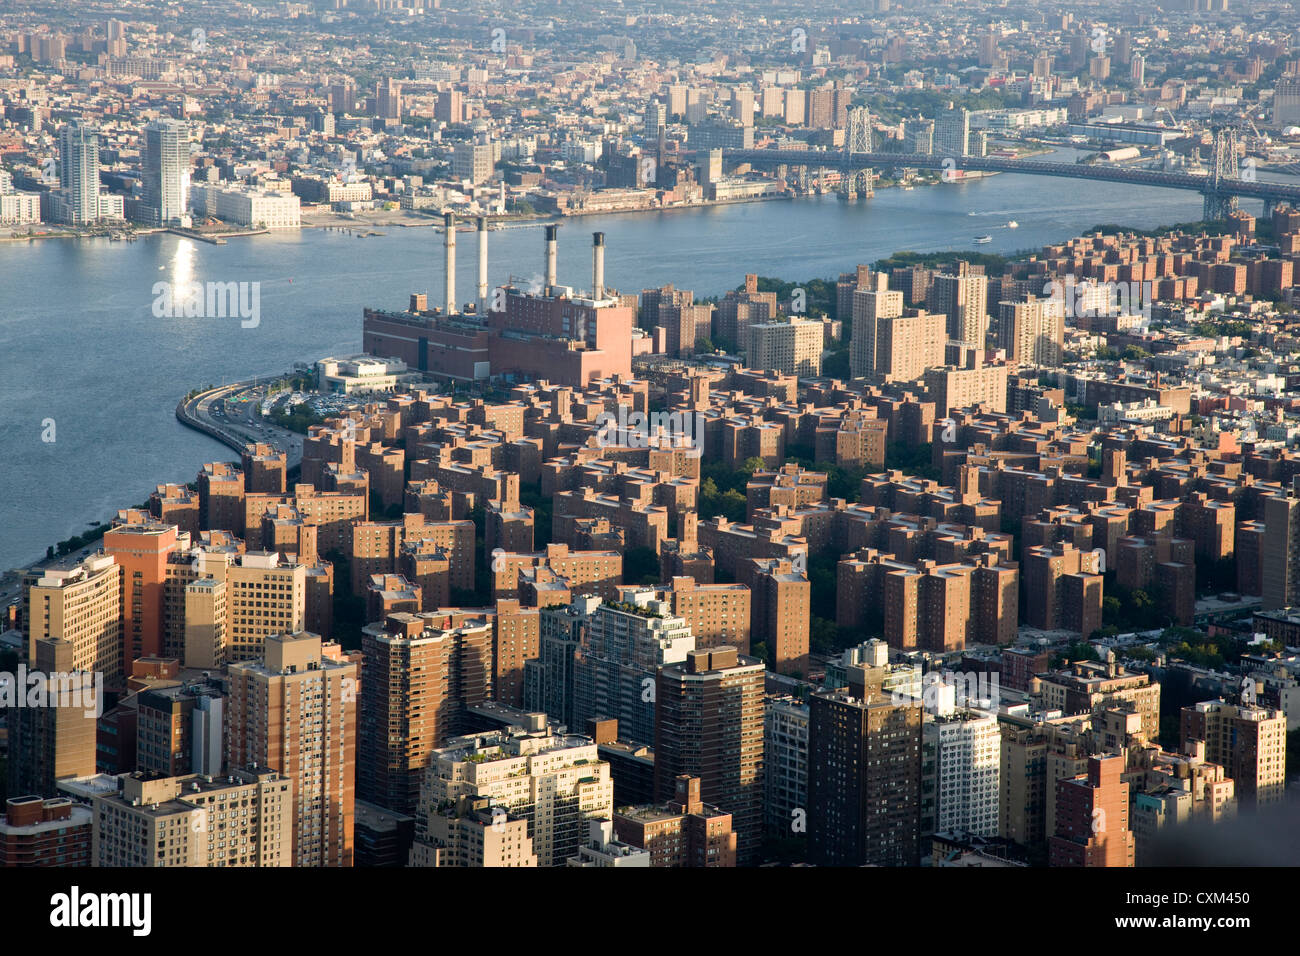 Manhattan viewed from the observation deck of the Empire State Building in New York Stock Photo